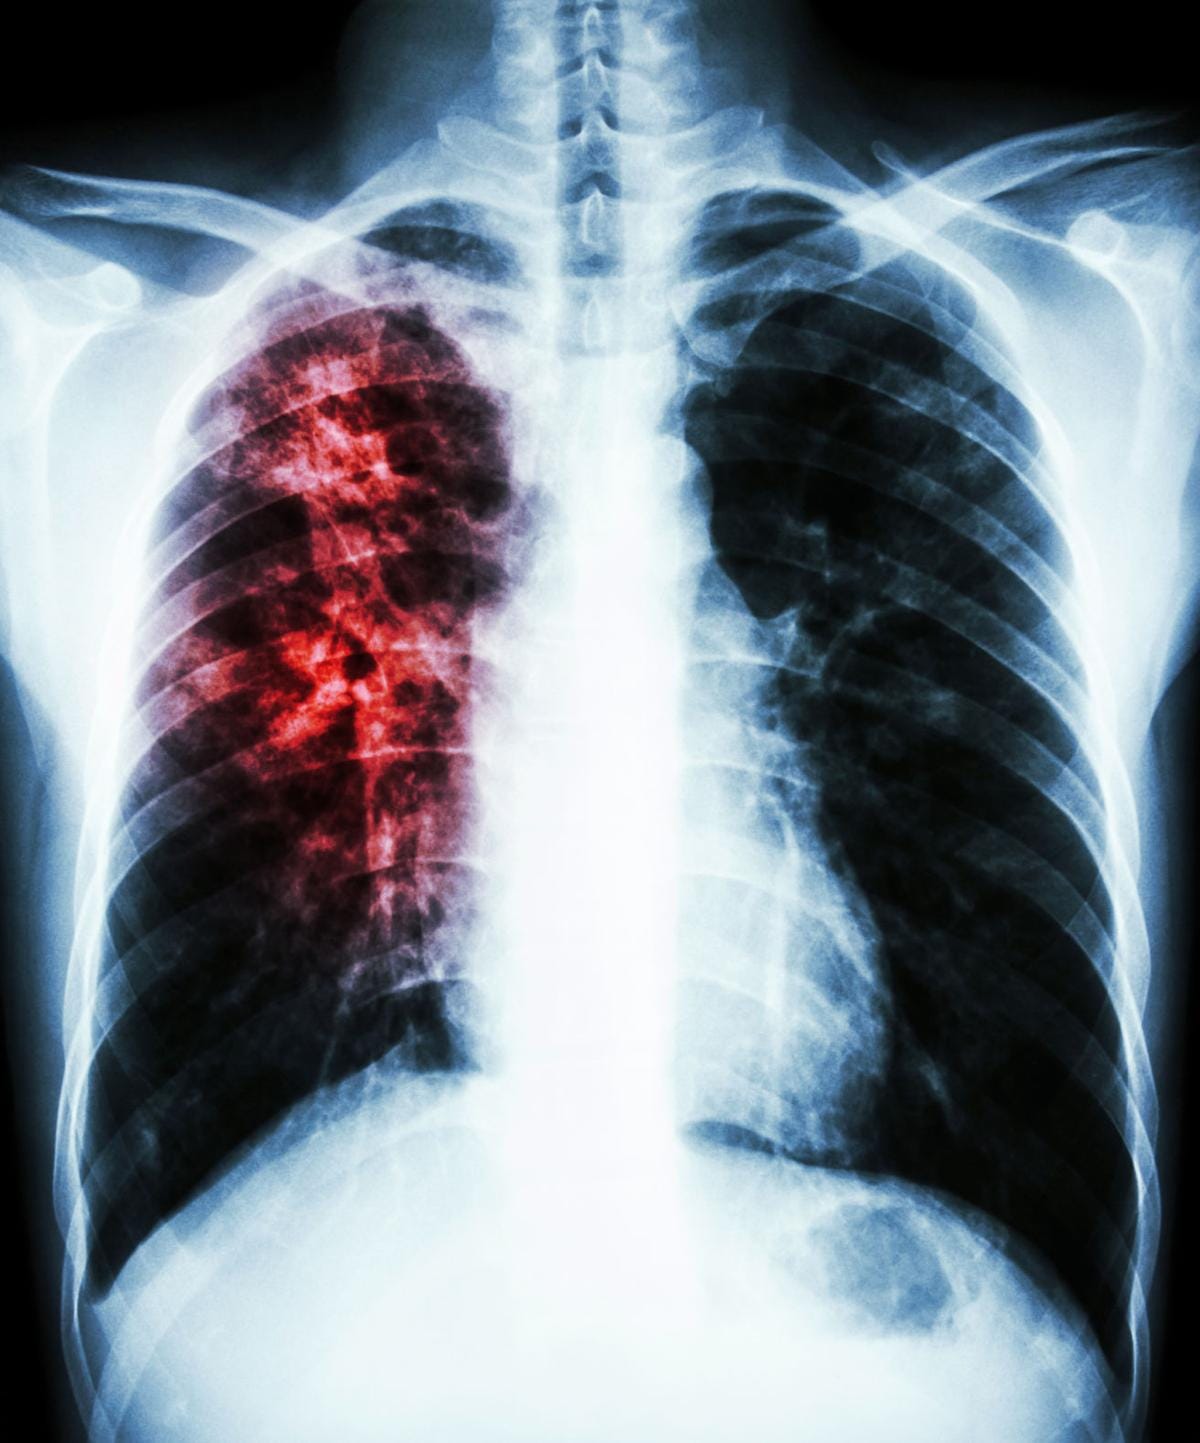 Tuberculosis case reported in Syracuse school district ...